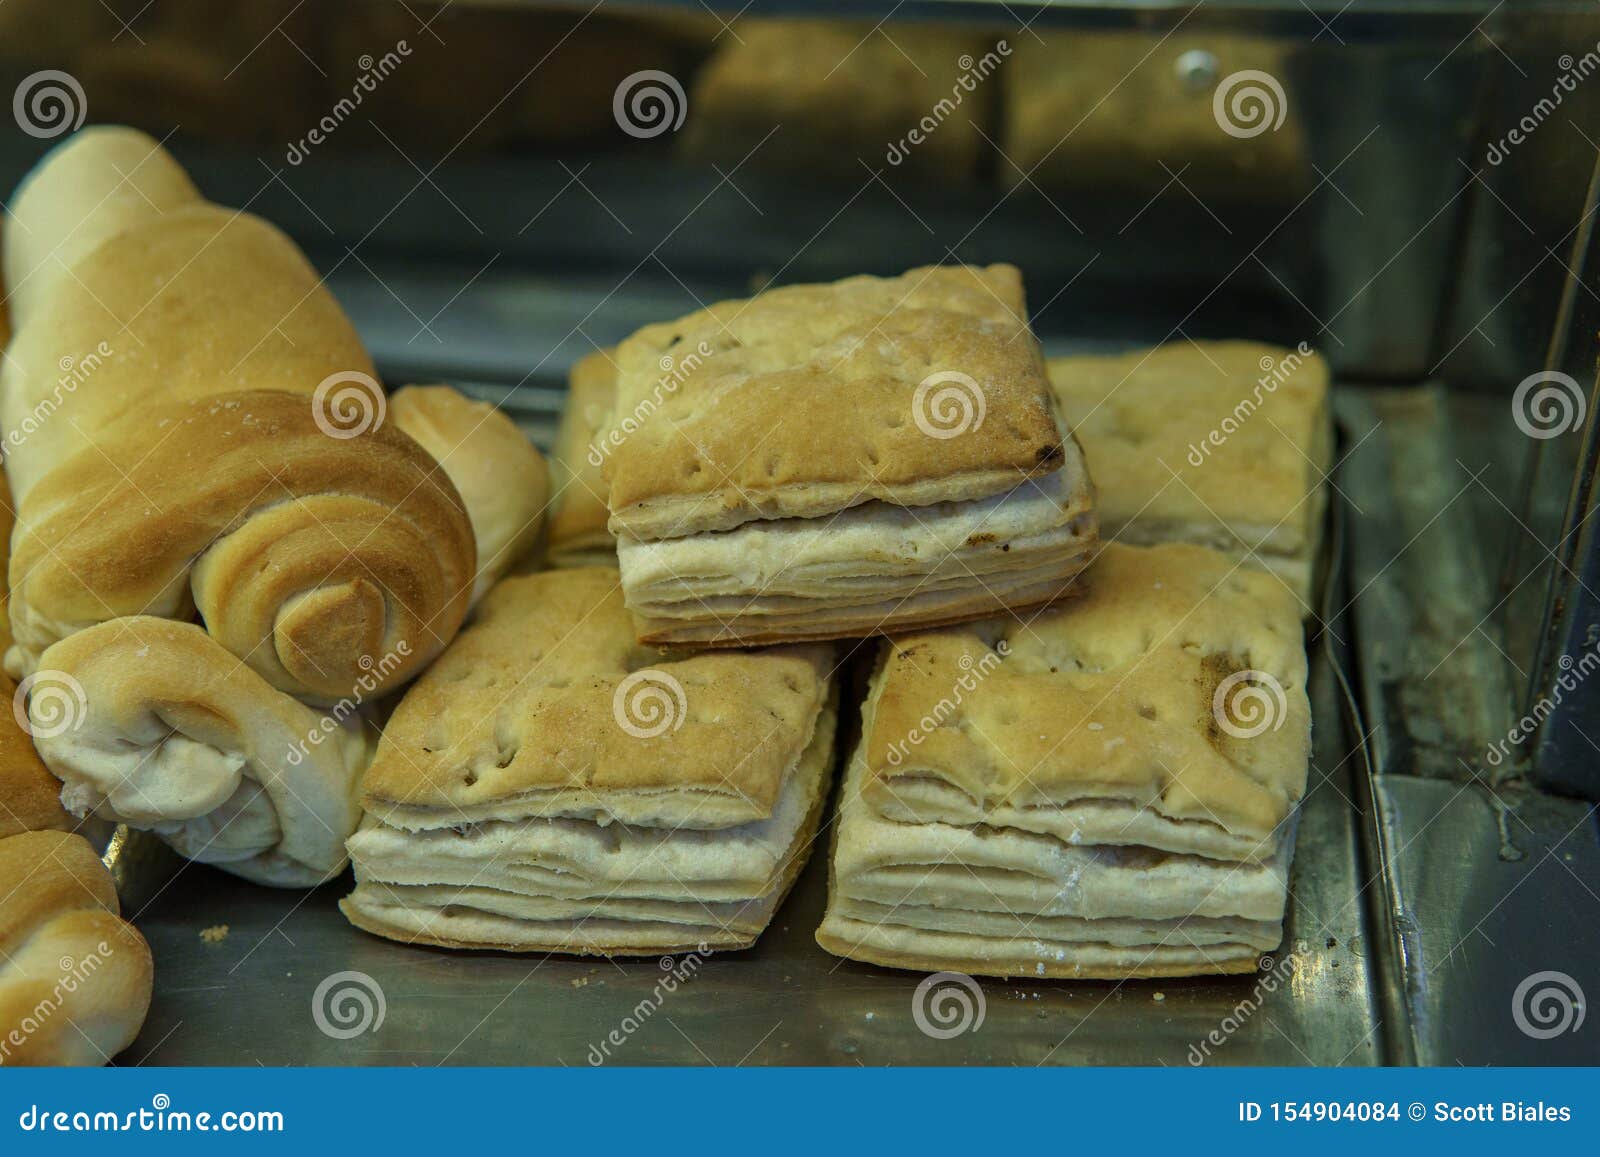 folded pastries being sold in store